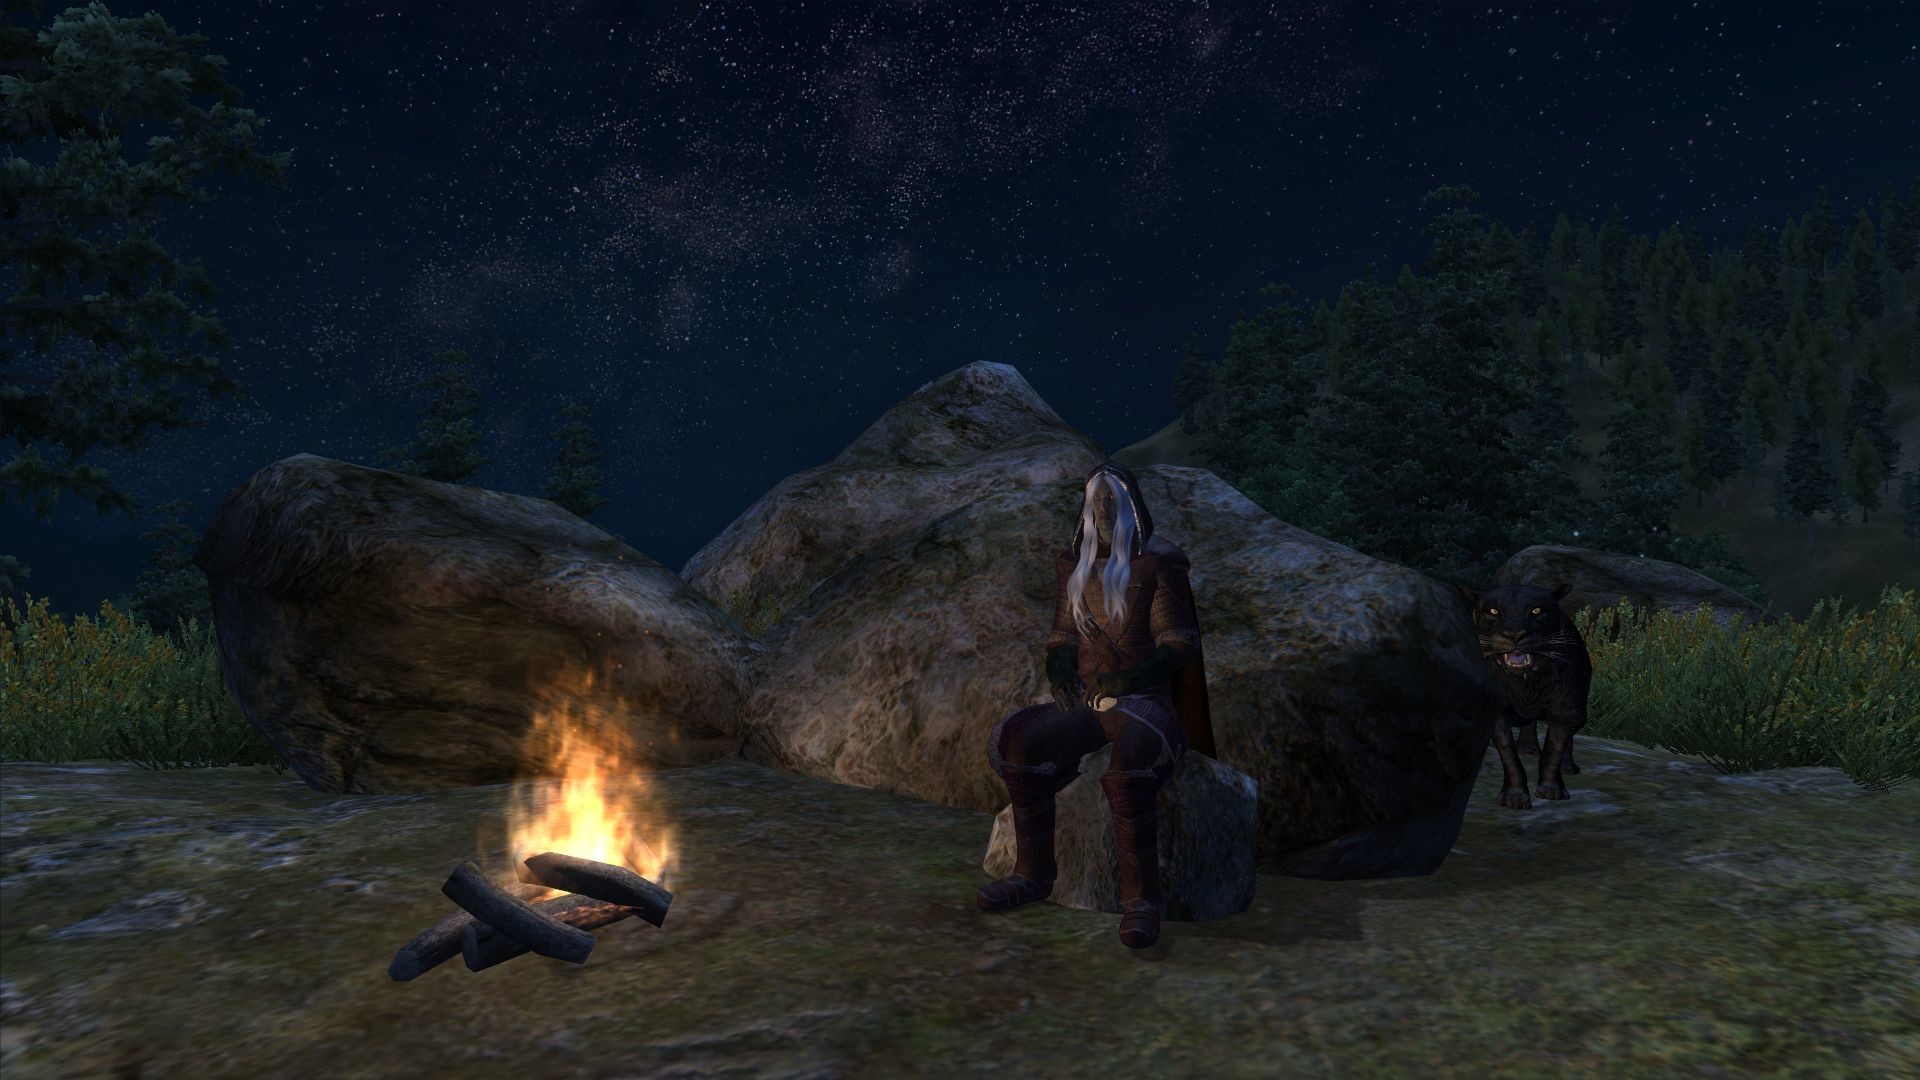 A night out in the wilderness with Drizzt and Guenhywar